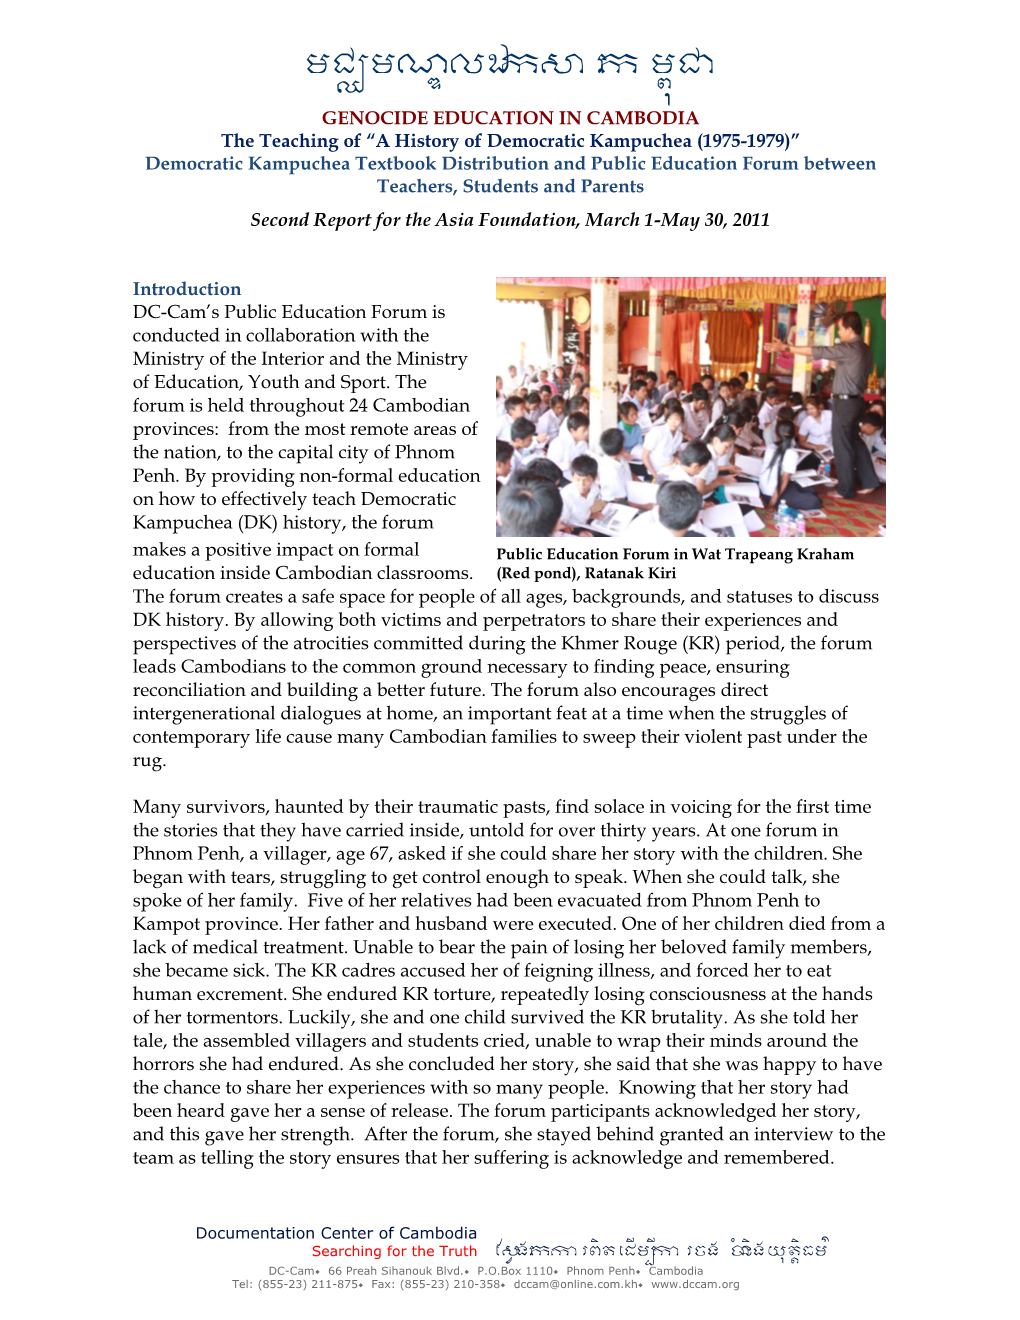 Second Report on Public Education Forum for the Asia Foundation